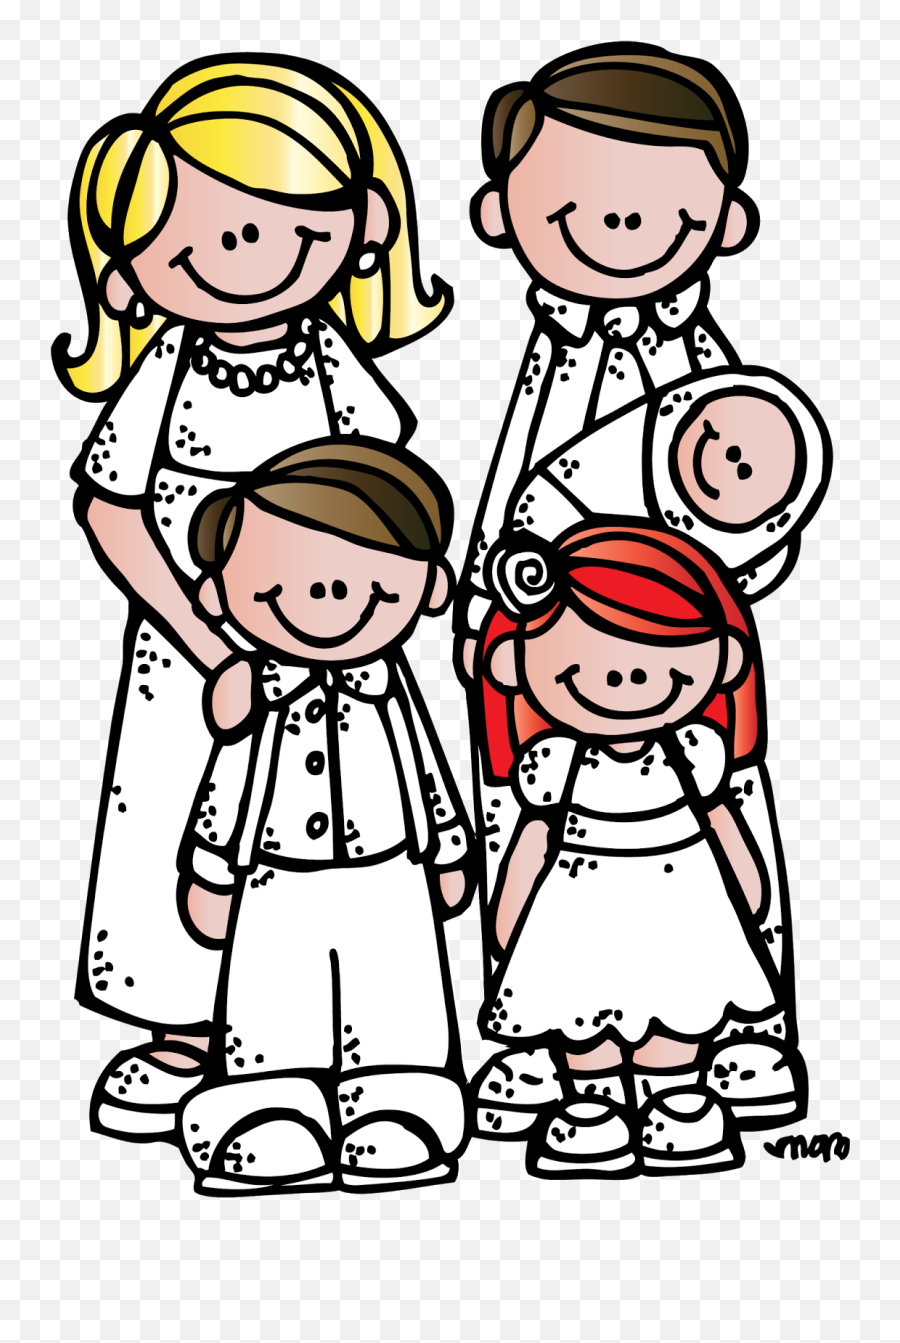 Download Family Quotes Clip Art - Family Portrait For Coloring Emoji,Free Family Emoji Clipart